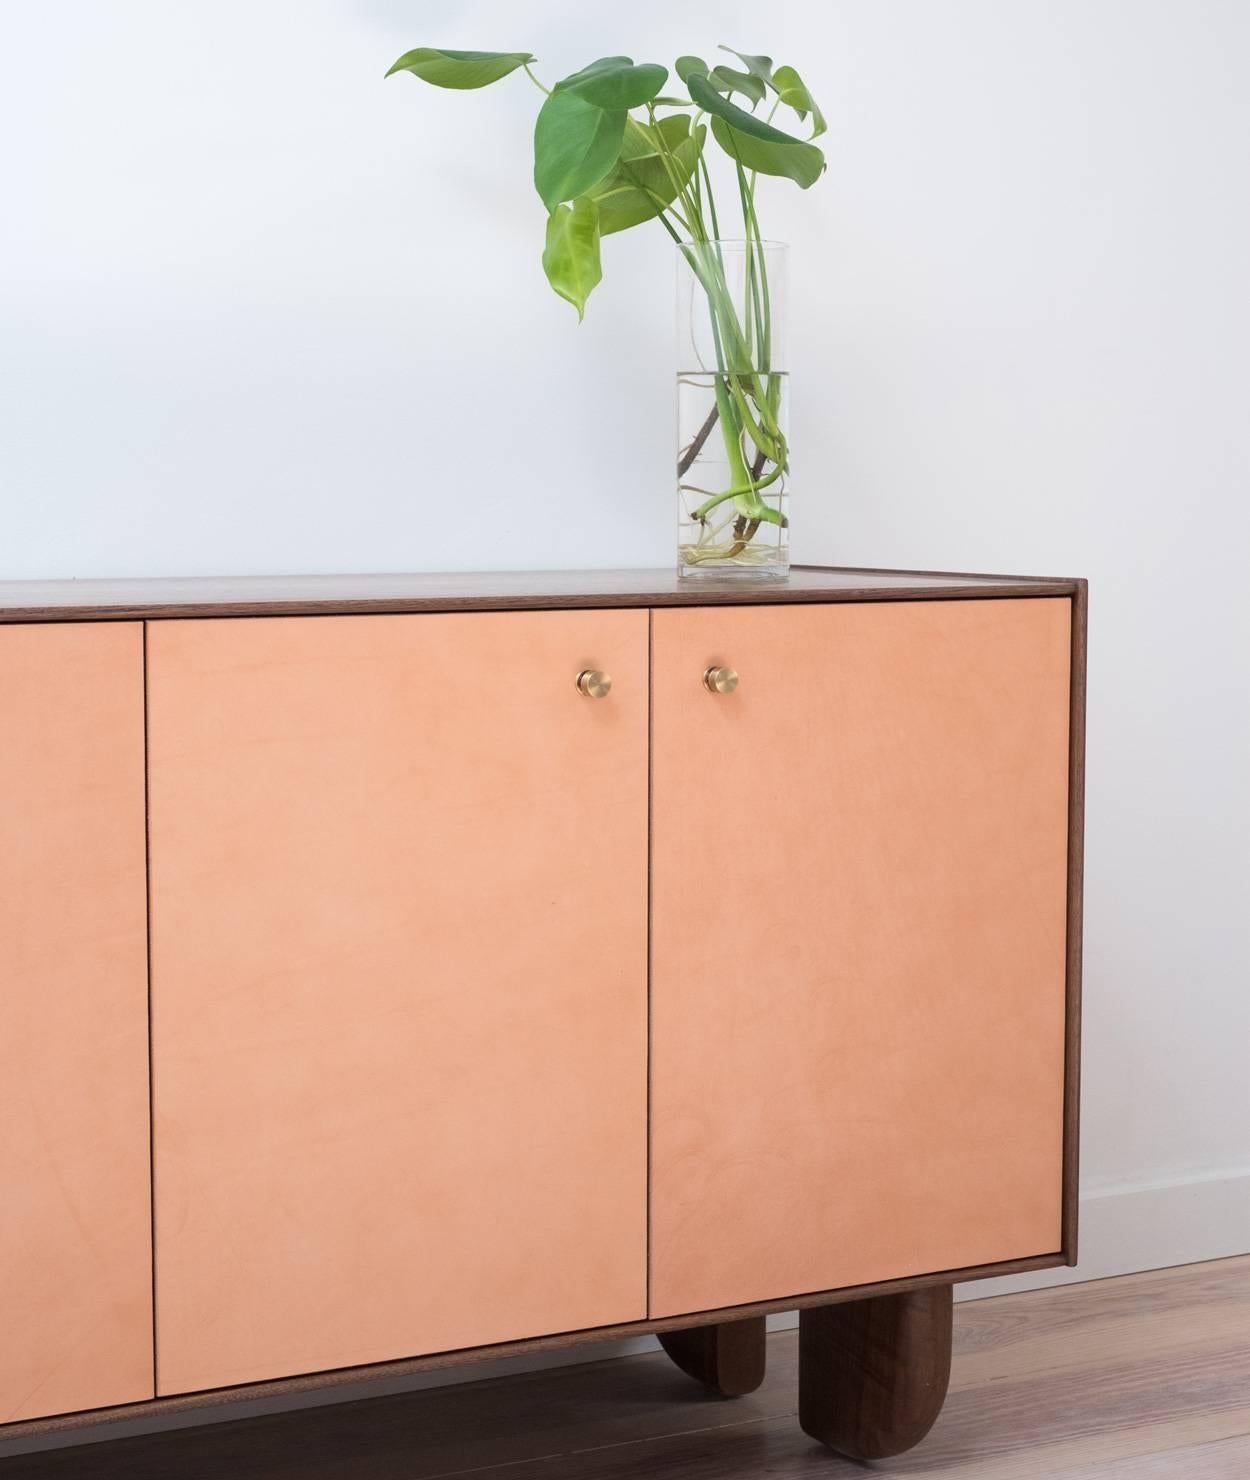 Part of the Profile Cabinetry Series, the Profile Credenza offers an elevated take on traditional cabinet construction. It features a clean, minimal edge in solid black walnut, with doors and drawer faces clad in vegetable-tanned leather. Both the